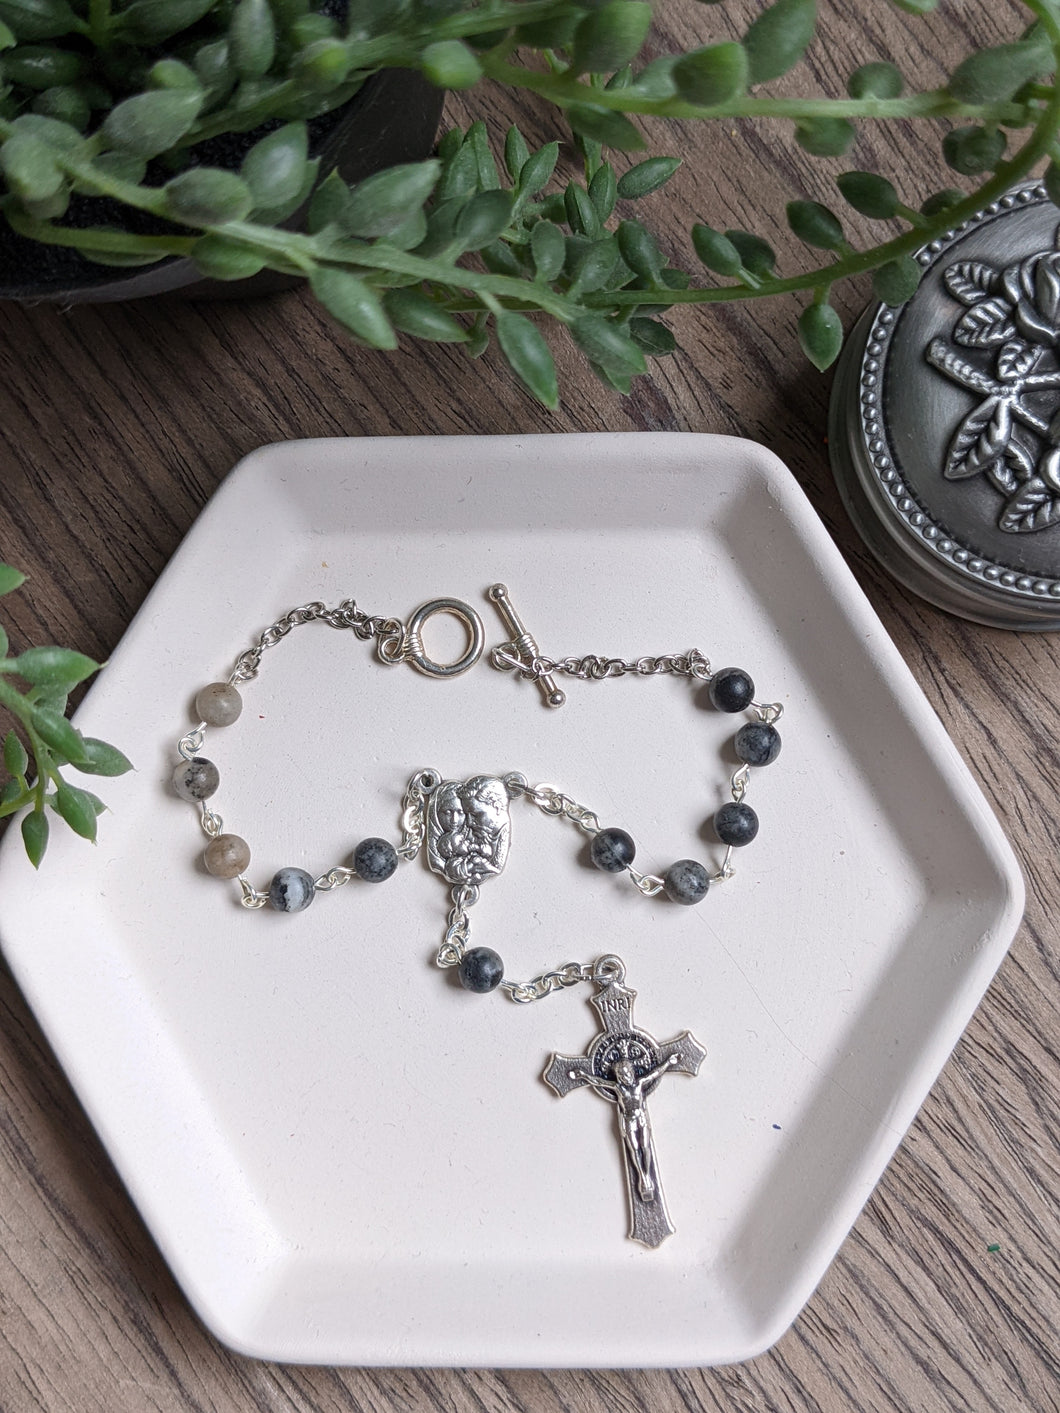 A small jasper stone car rosary featuring a holy family centerpiece and st benedict crucifix lays on a white tray. The background is wood with a plant and a rosary holder